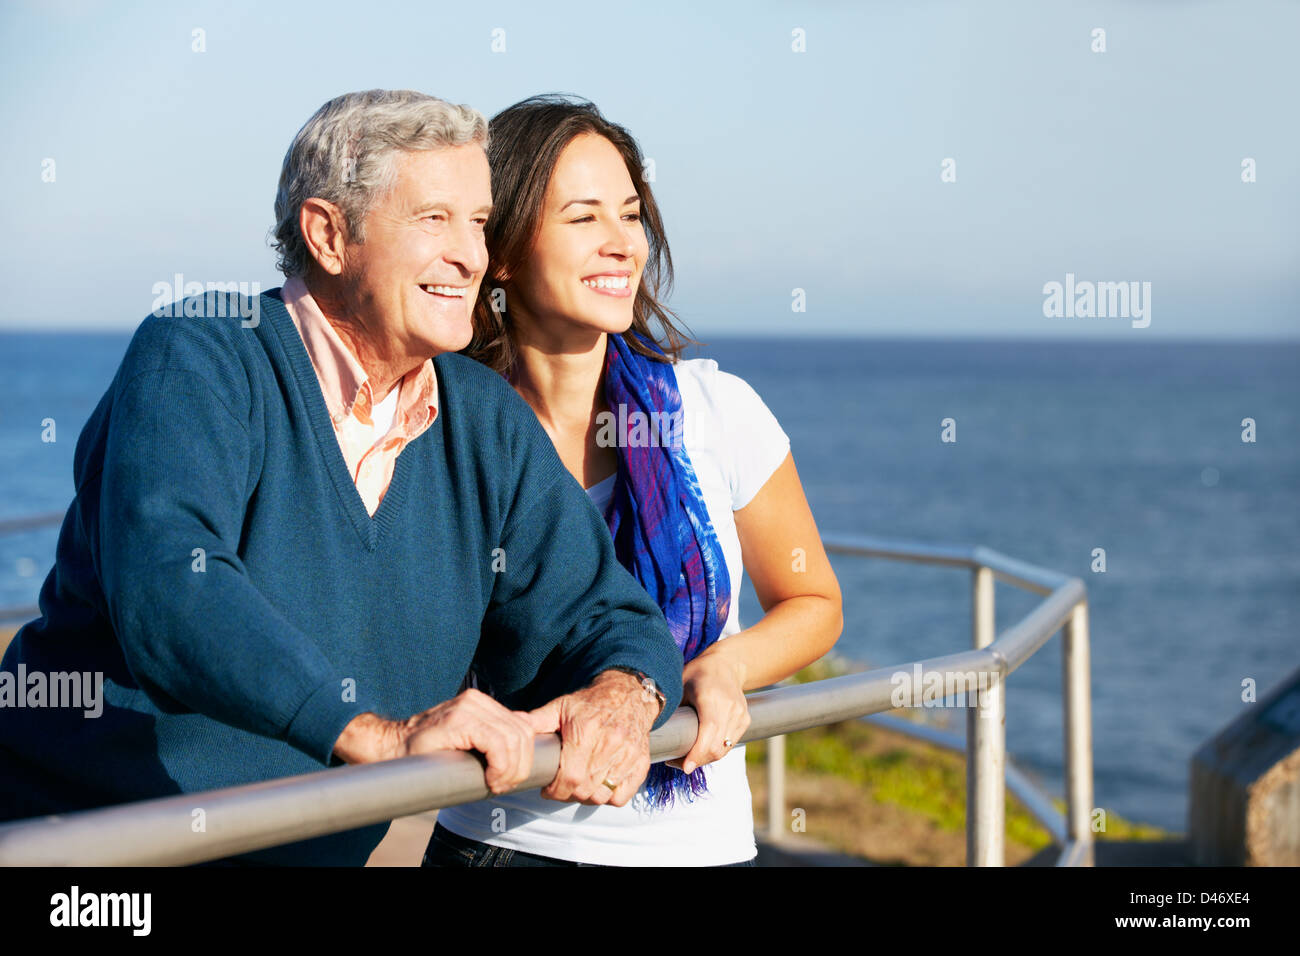 Senior Man With Adult Daughter Looking Over Railing At Sea Stock Photo